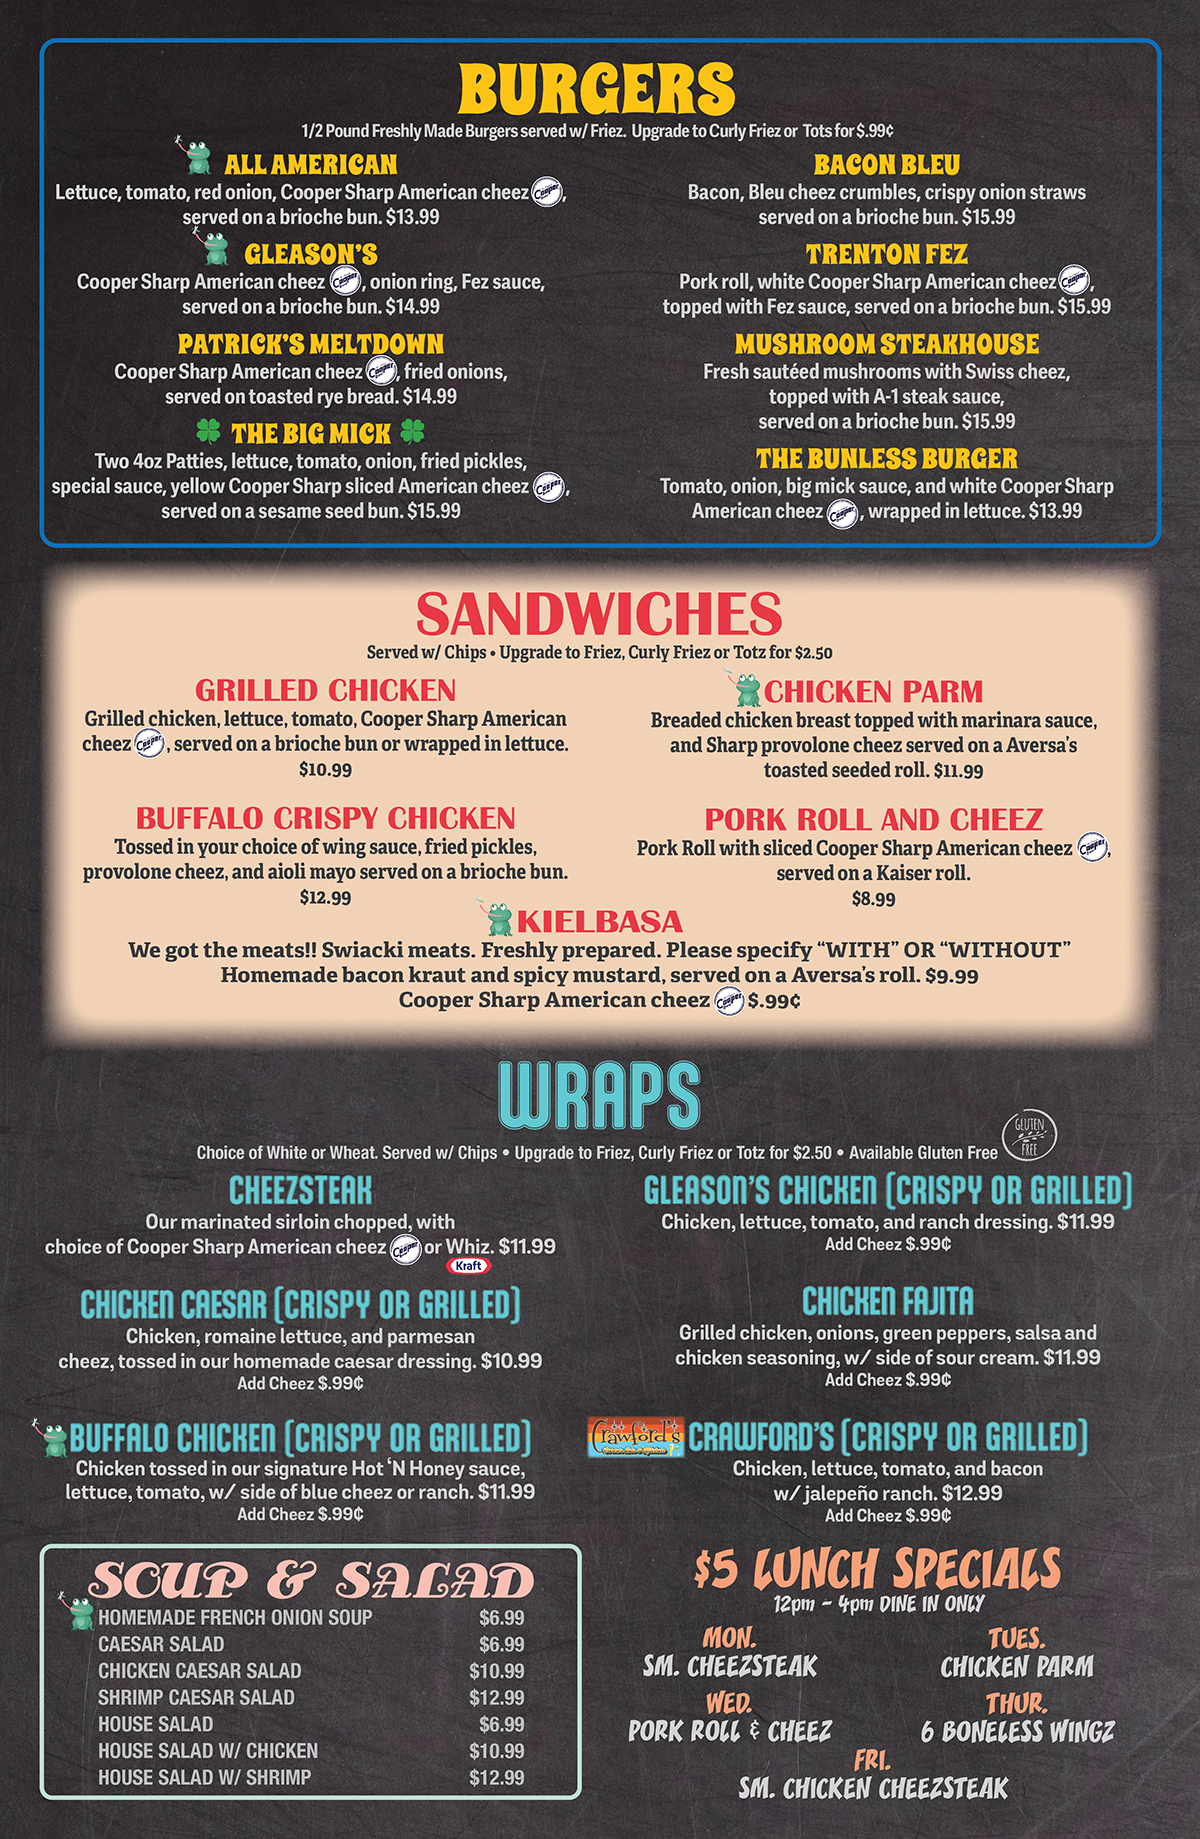 A menu for burgers and wraps.